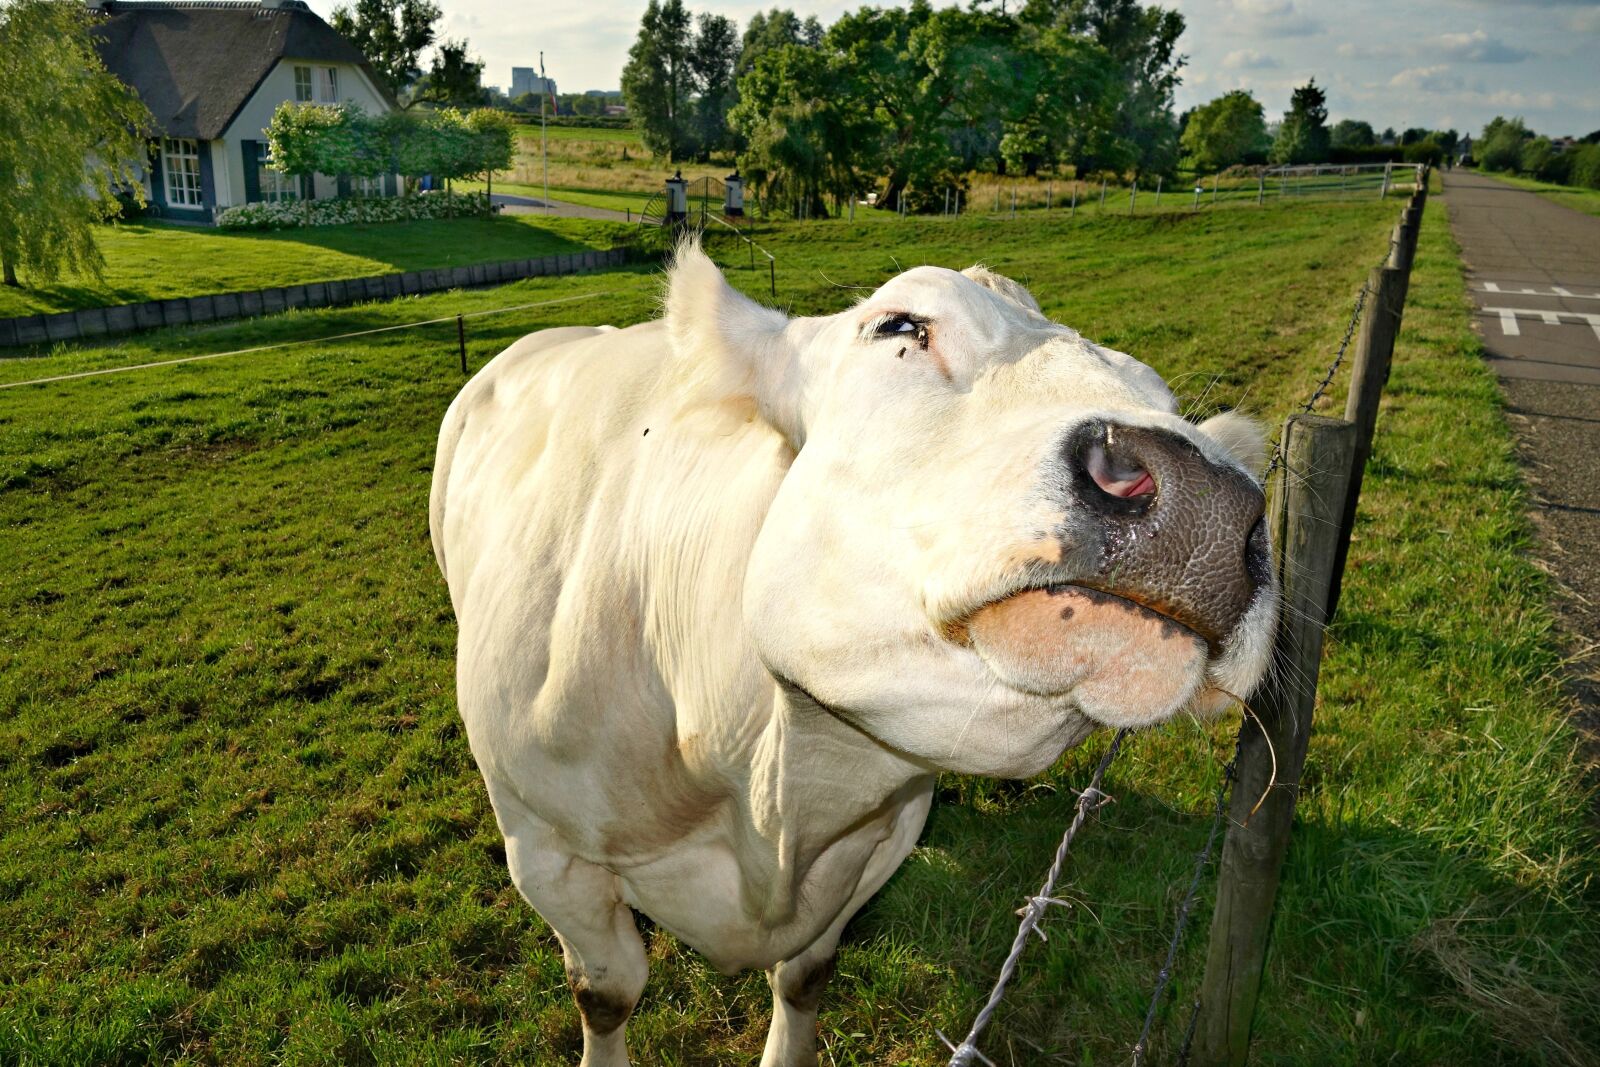 Sony Cyber-shot DSC-RX100 sample photo. Cow, cattle, livestock photography